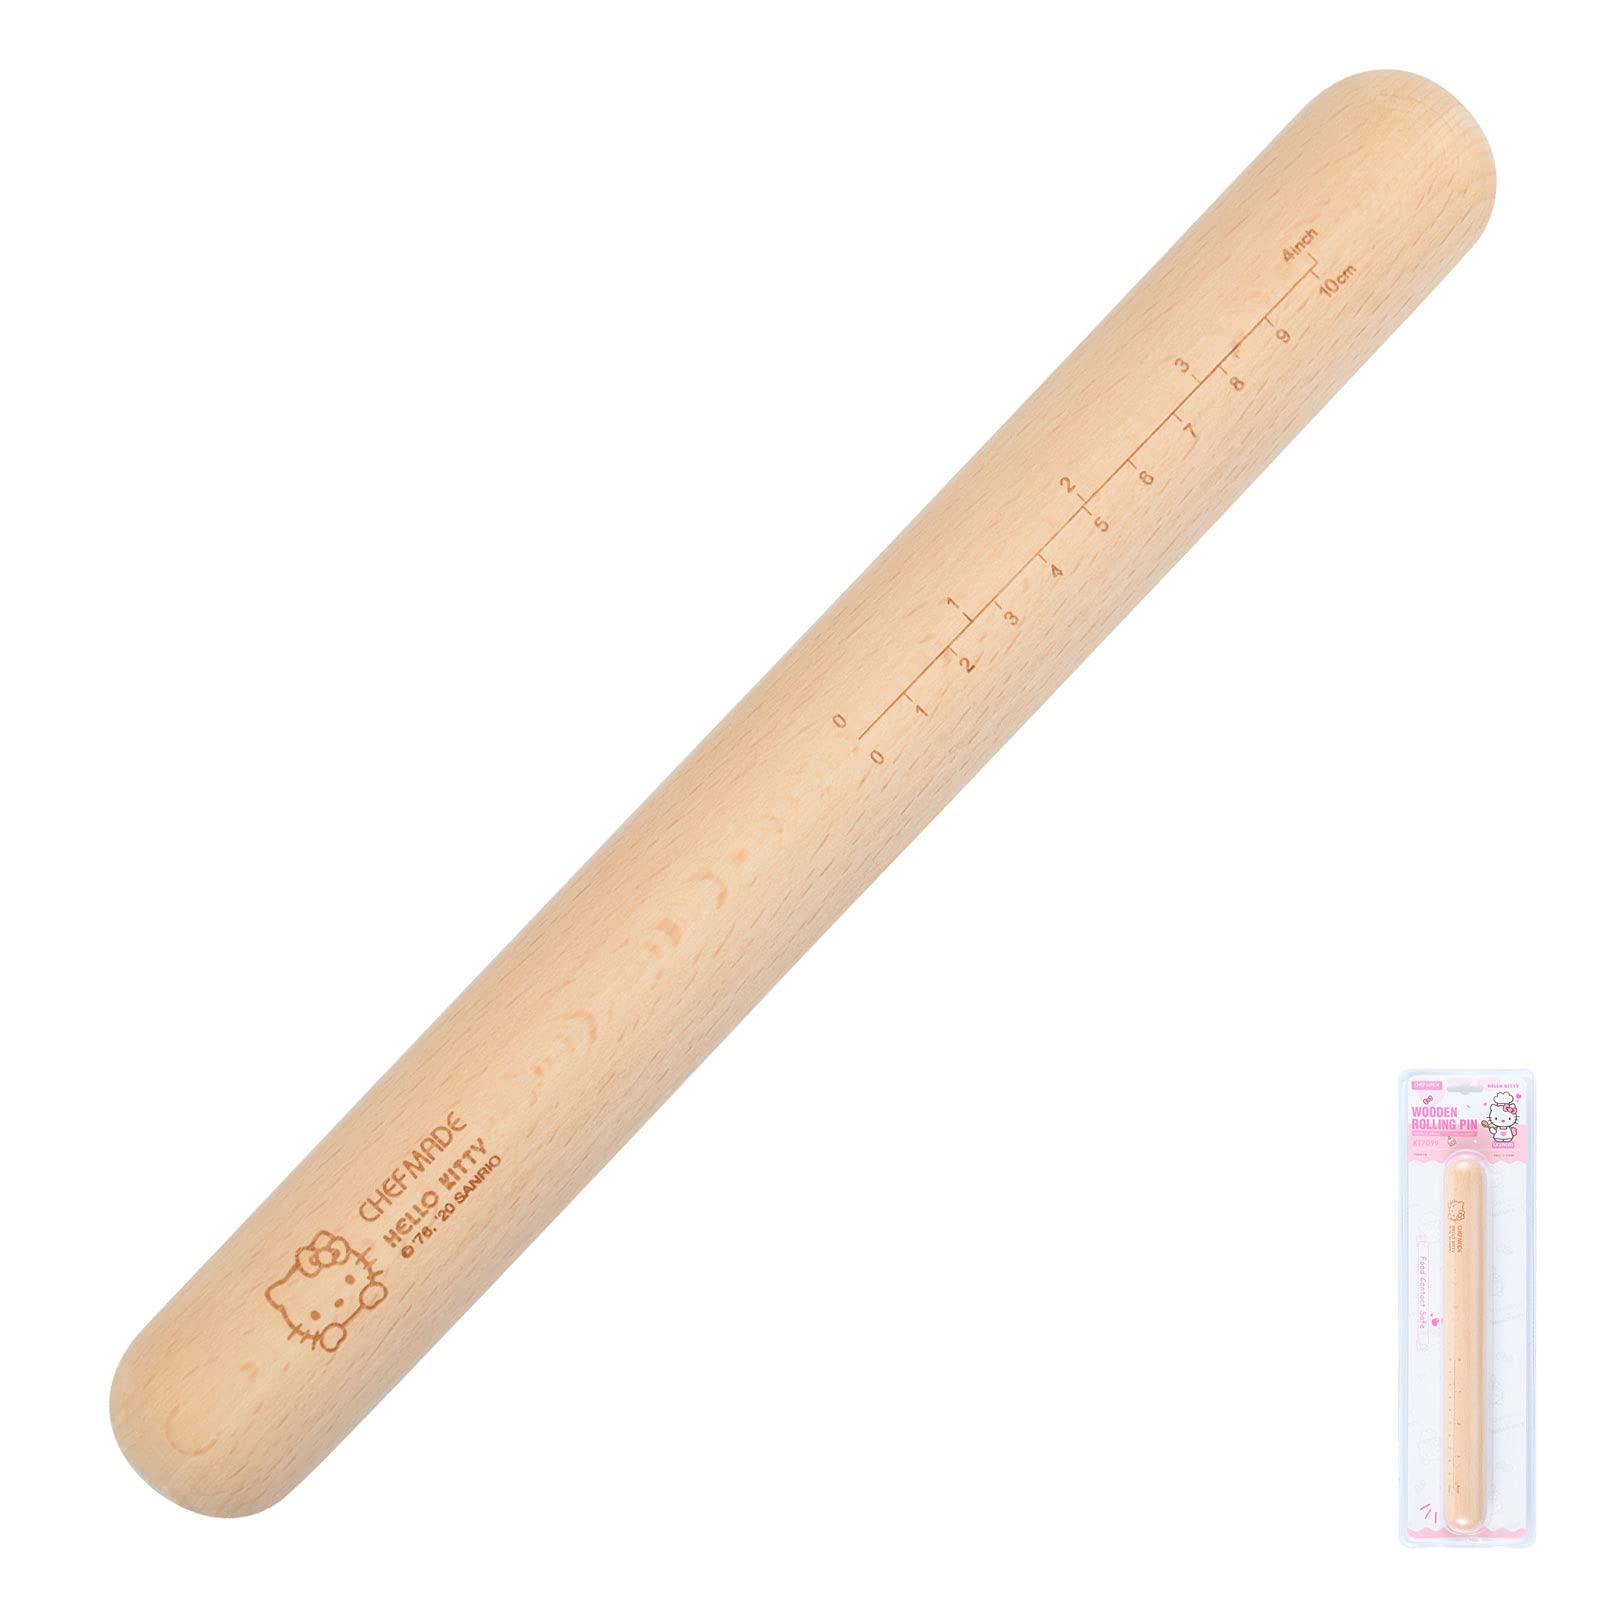 11.8" Hello Kitty Wooden Rolling Pin